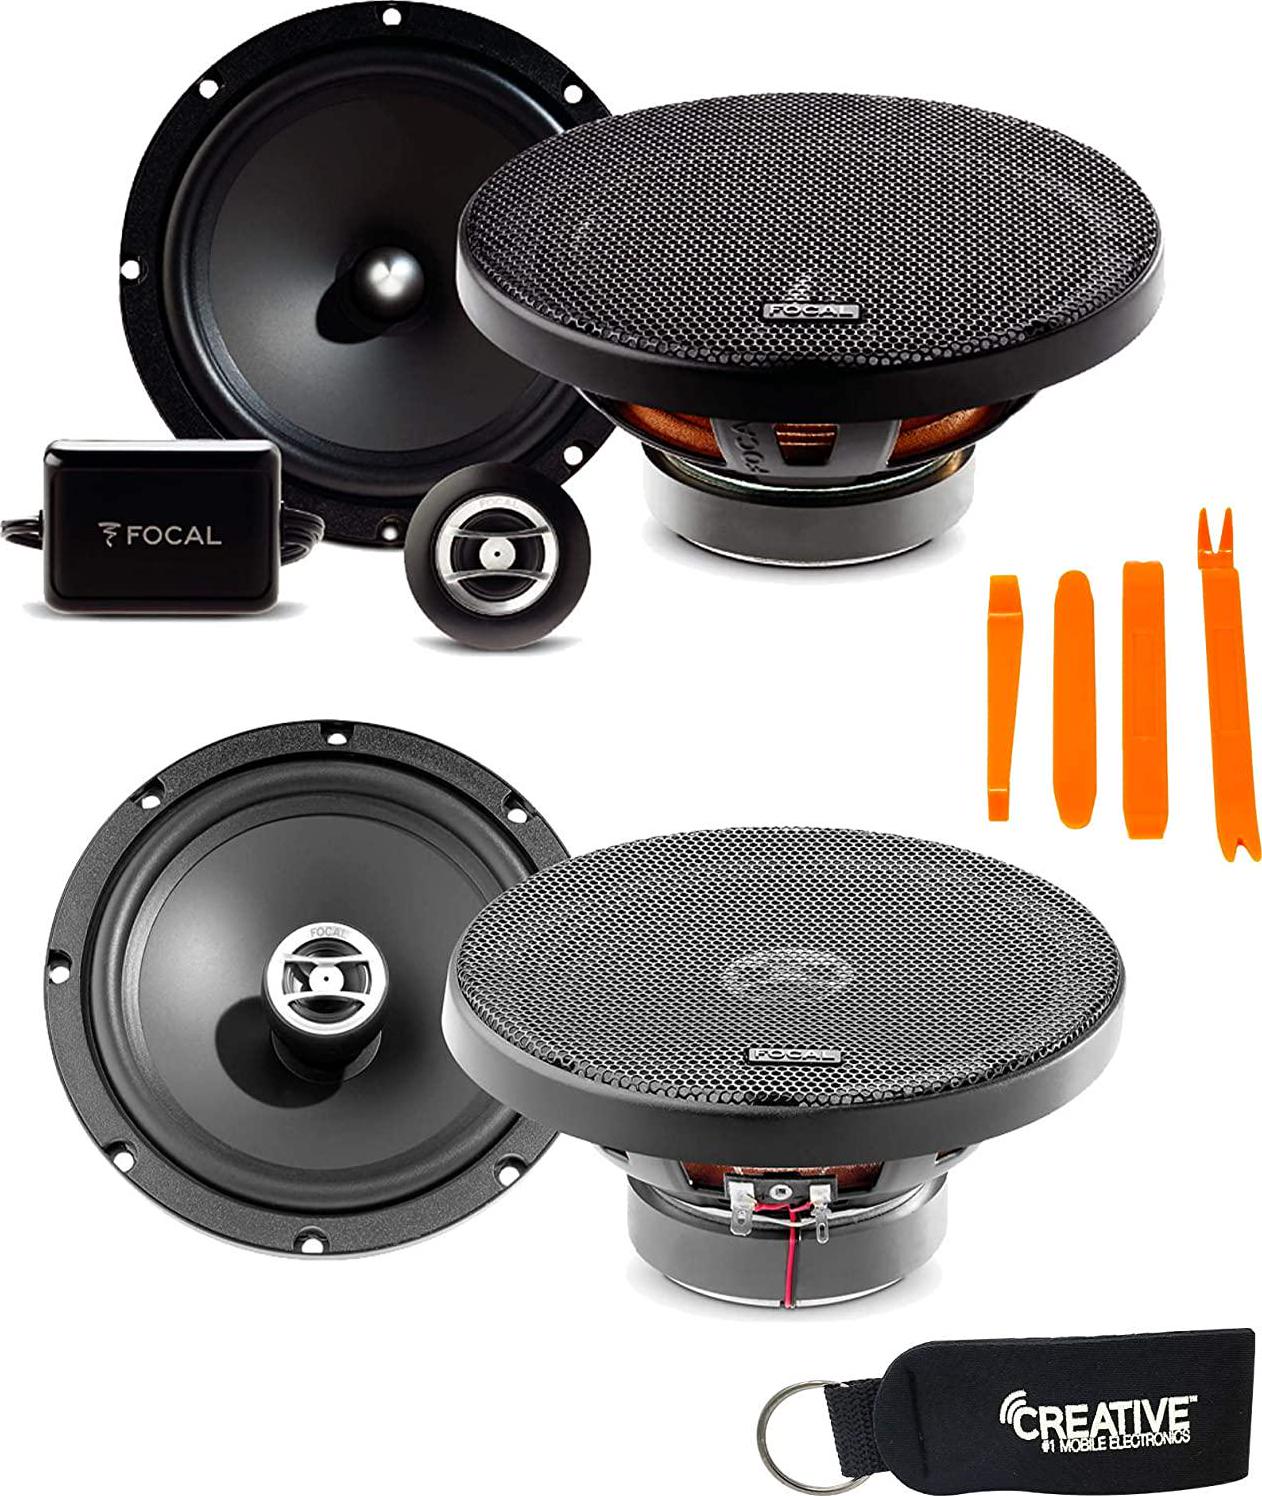 Focal, Focal Auditor Bundle - RSE-165 6.5 2-Way Component Speakers (Pair) and RCX-165 6.5 2-Way Coaxial Speakers (Pair)